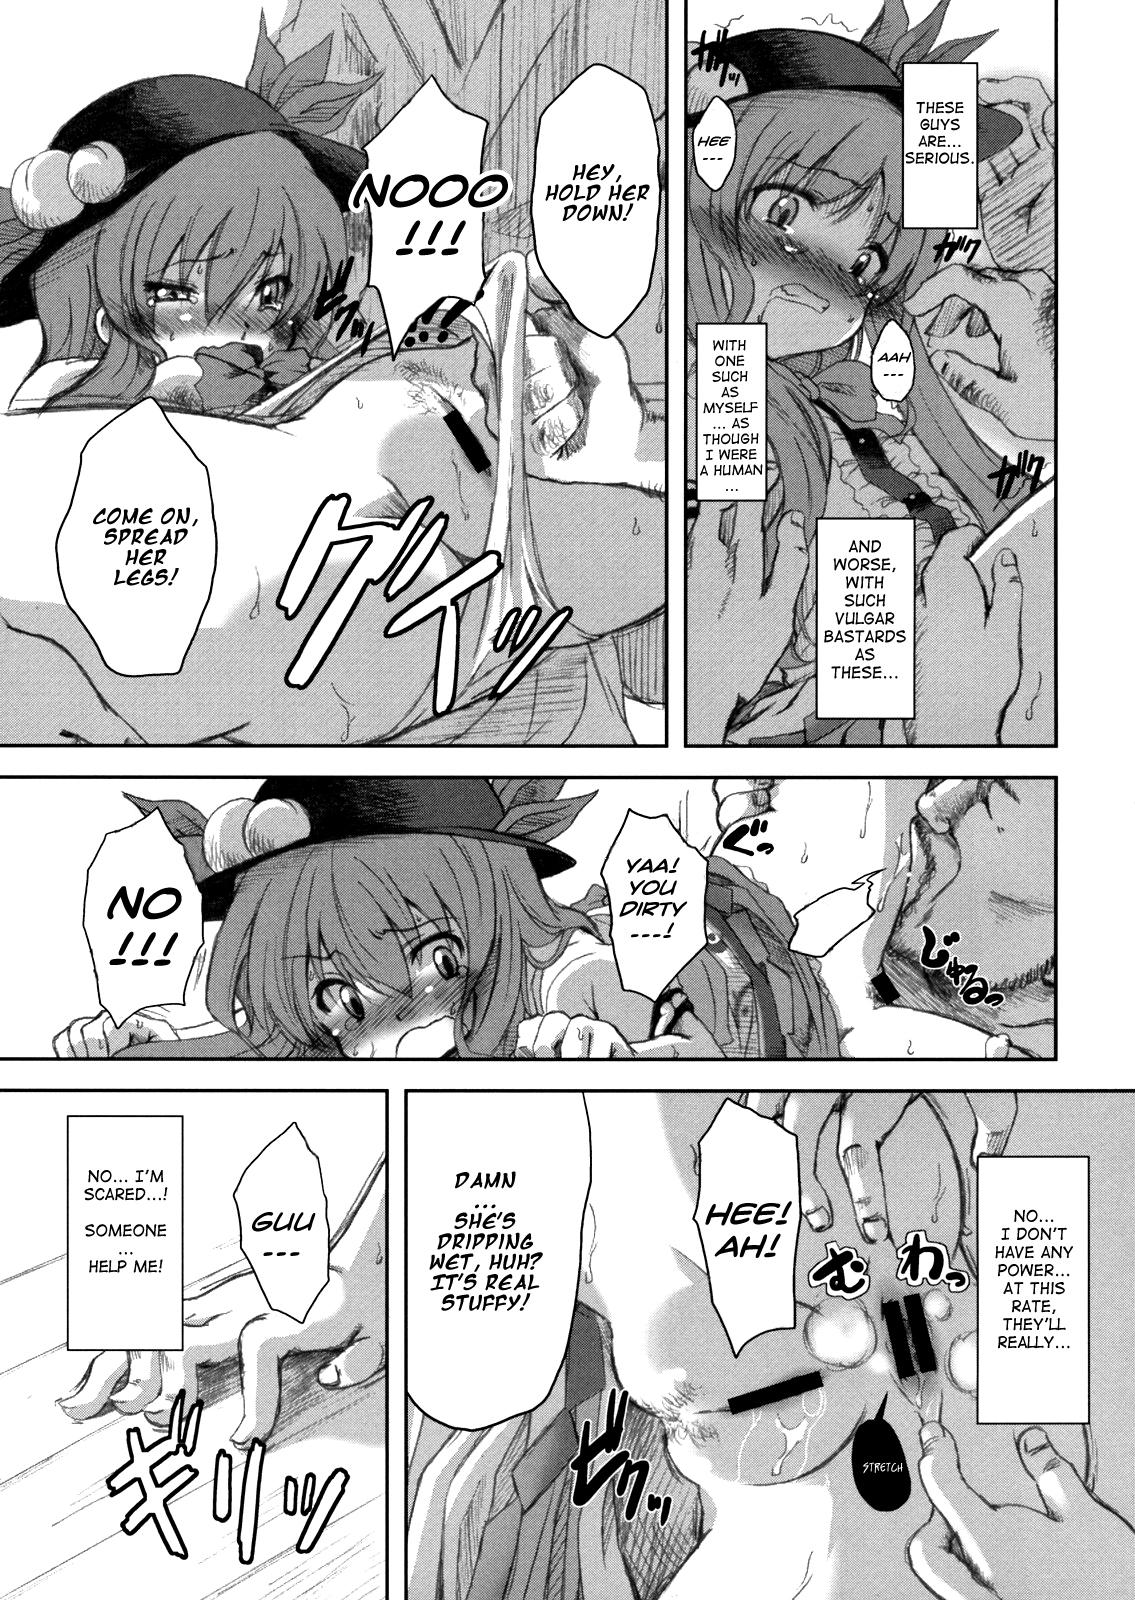 Petite FIRE - Touhou project Blows - Page 9